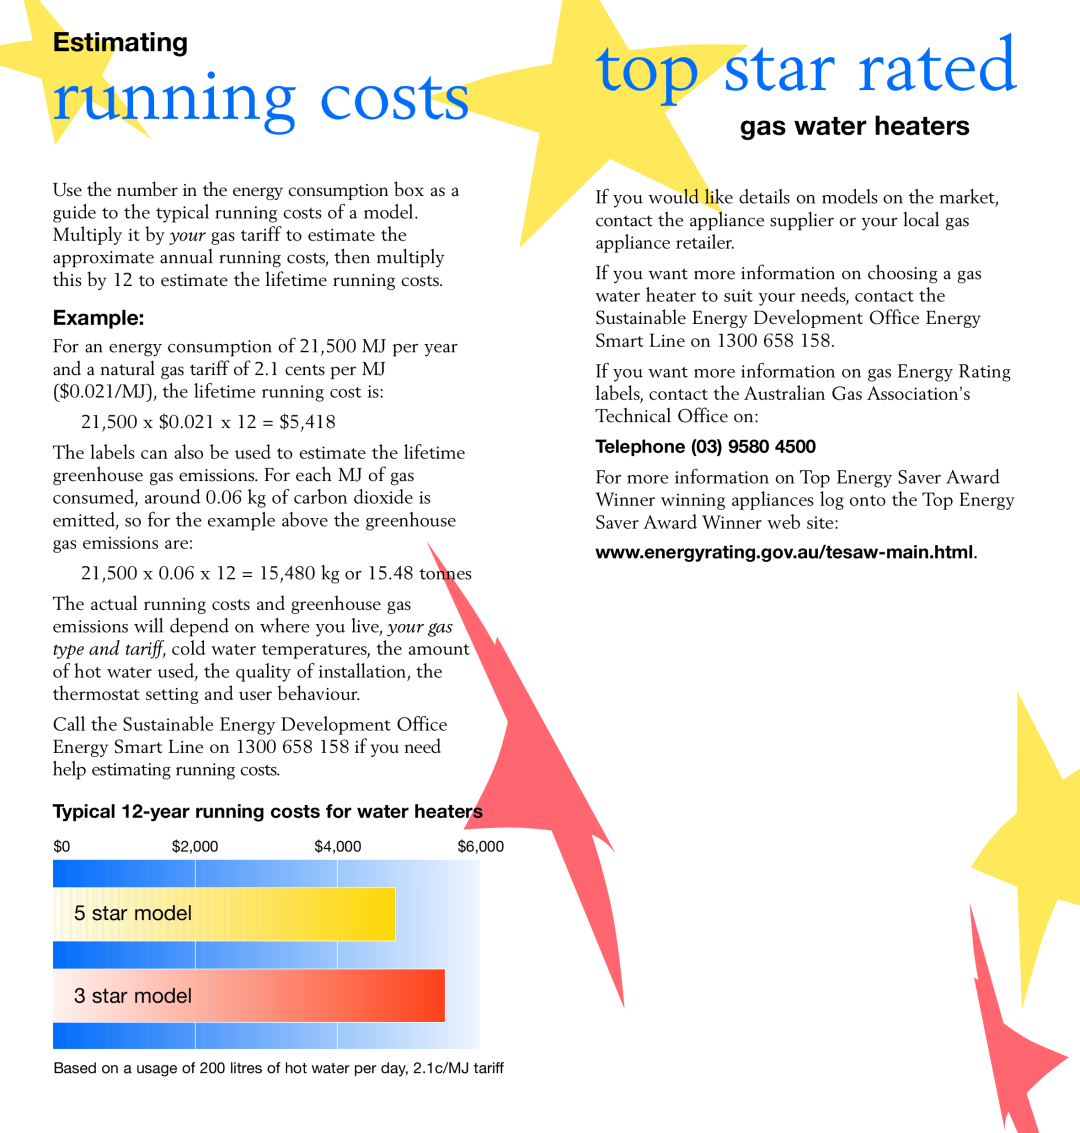 Energy Tech Laboratories SS120 brochure running costs, top star rated, Estimating, gas water heaters, Example, star model 